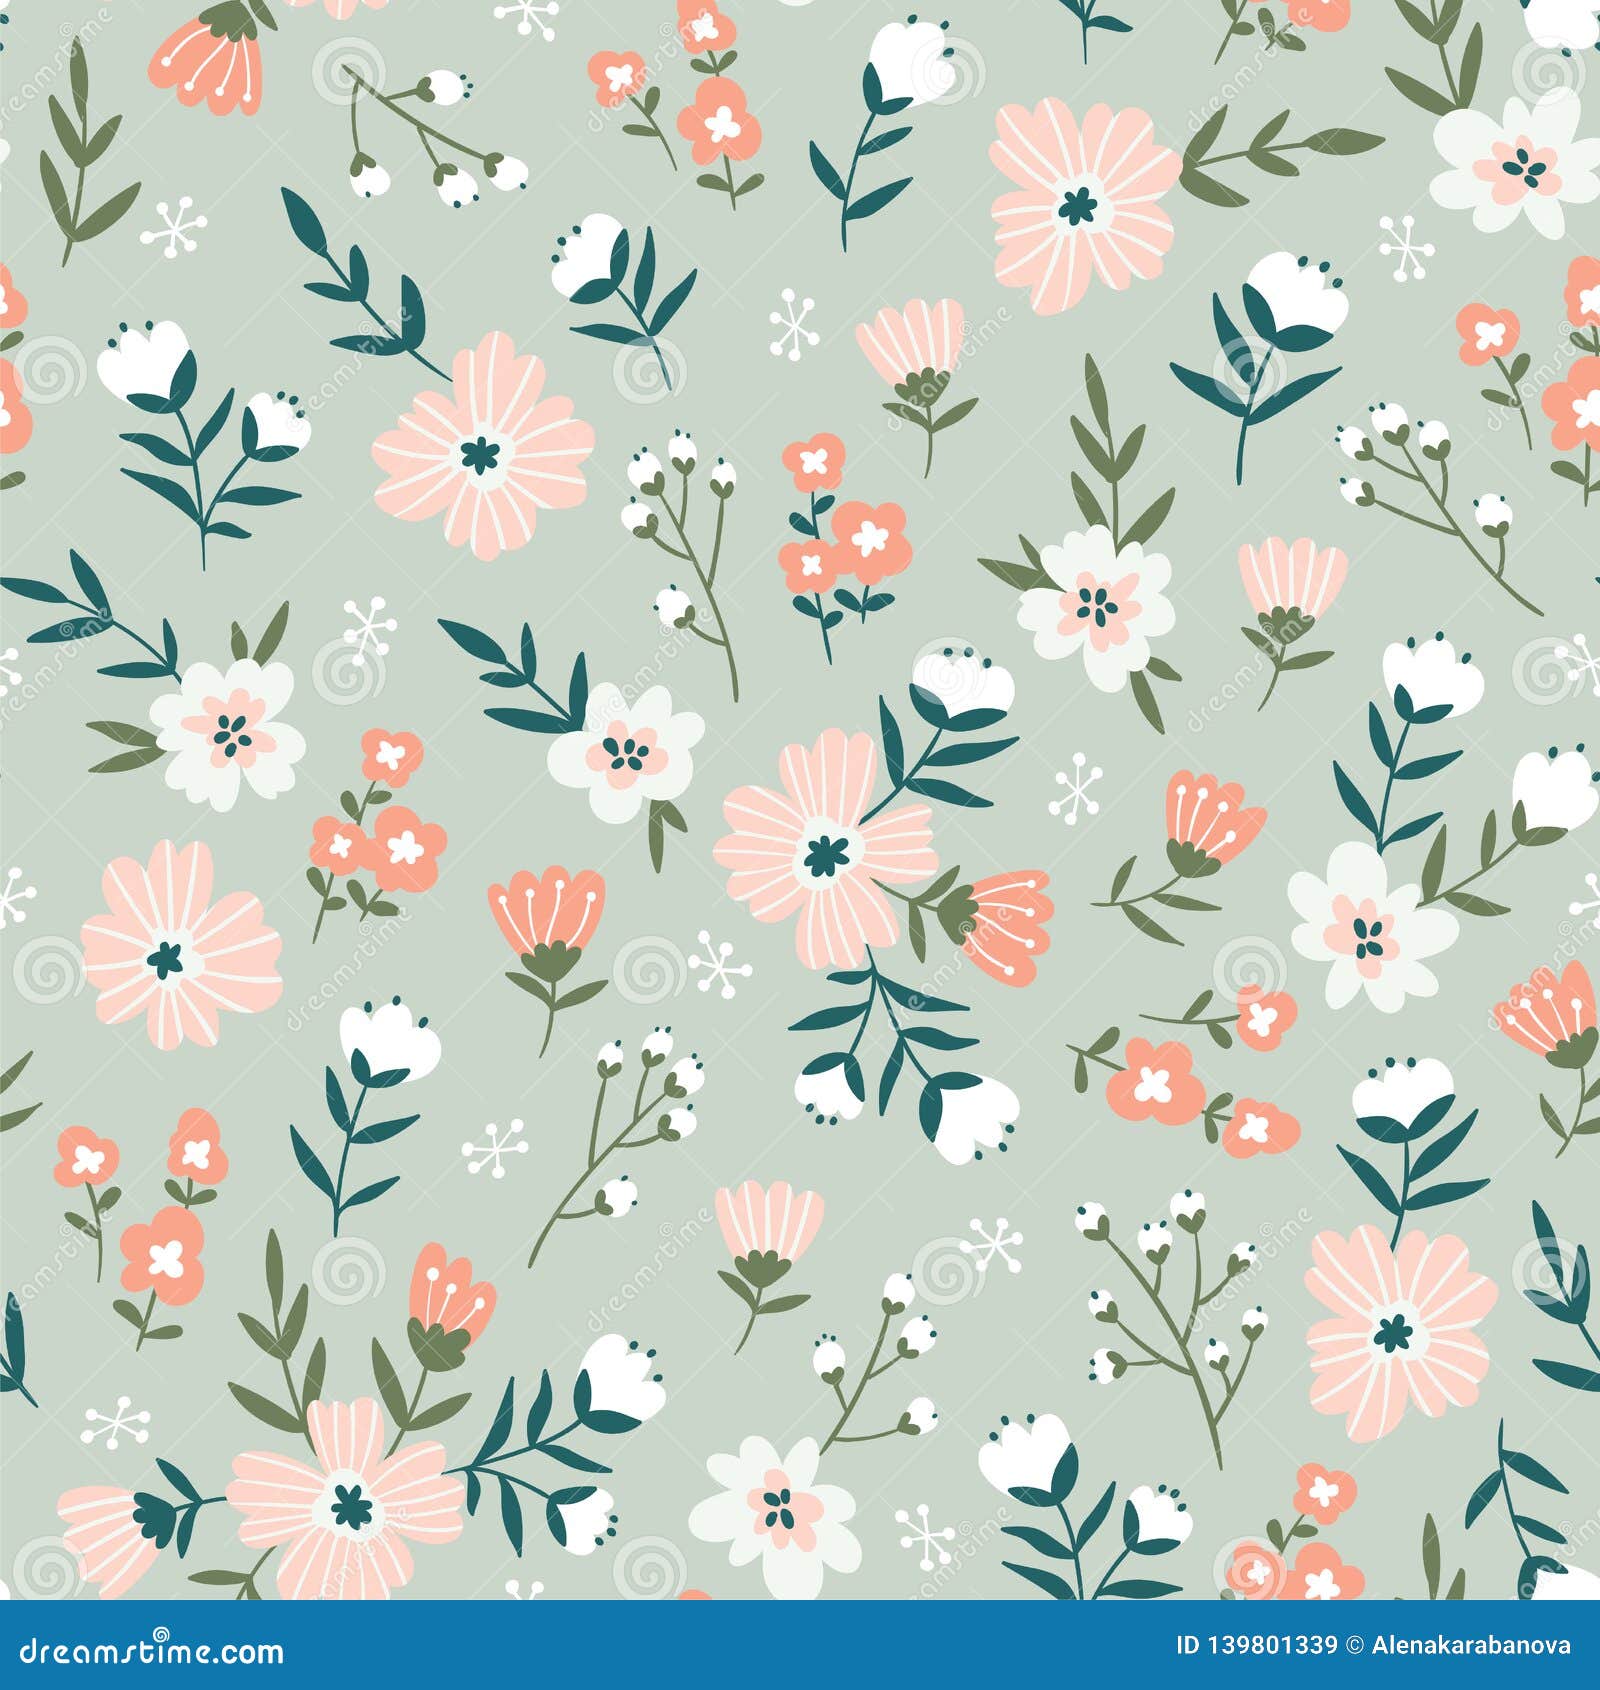 Fabric Seamless Design with Simple Flowers. Vector Cute Repeated Ditsy  Pattern for Fabric, Wallpaper or Wrap Paper Stock Vector - Illustration of  backdrop, meadow: 139801339